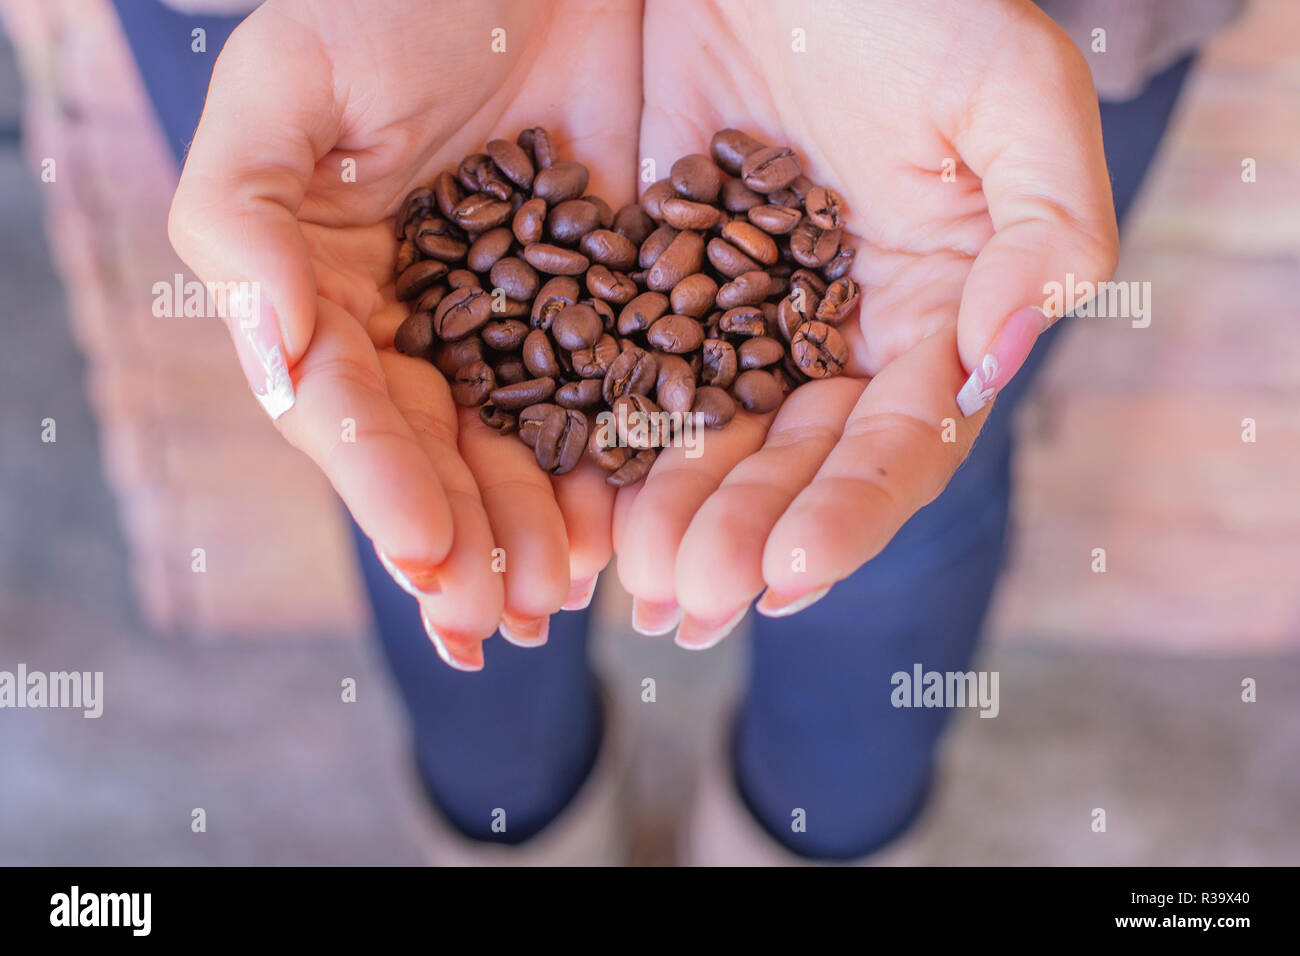 Coffee beans in the hands Stock Photo